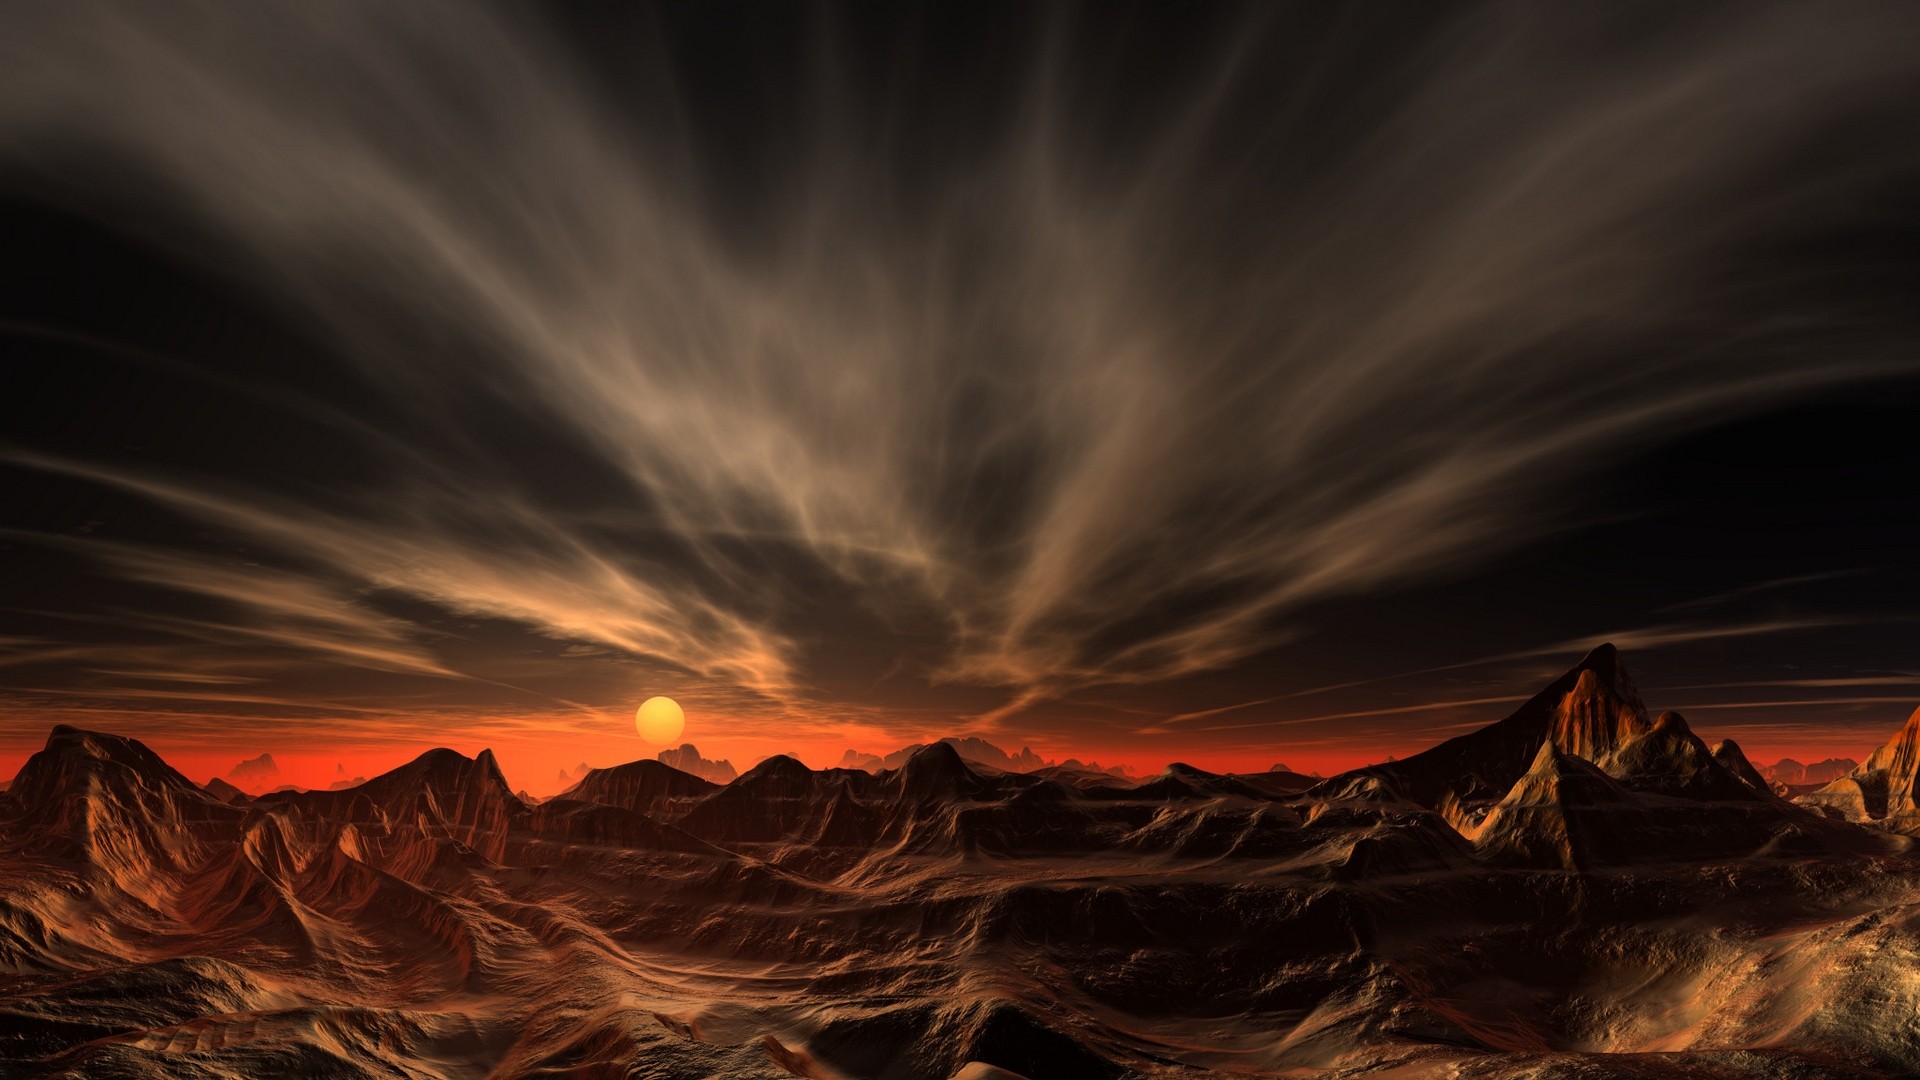 Landscape Nature Mountains Desert Sunset Clouds Sky Red Erosion 1920x1080